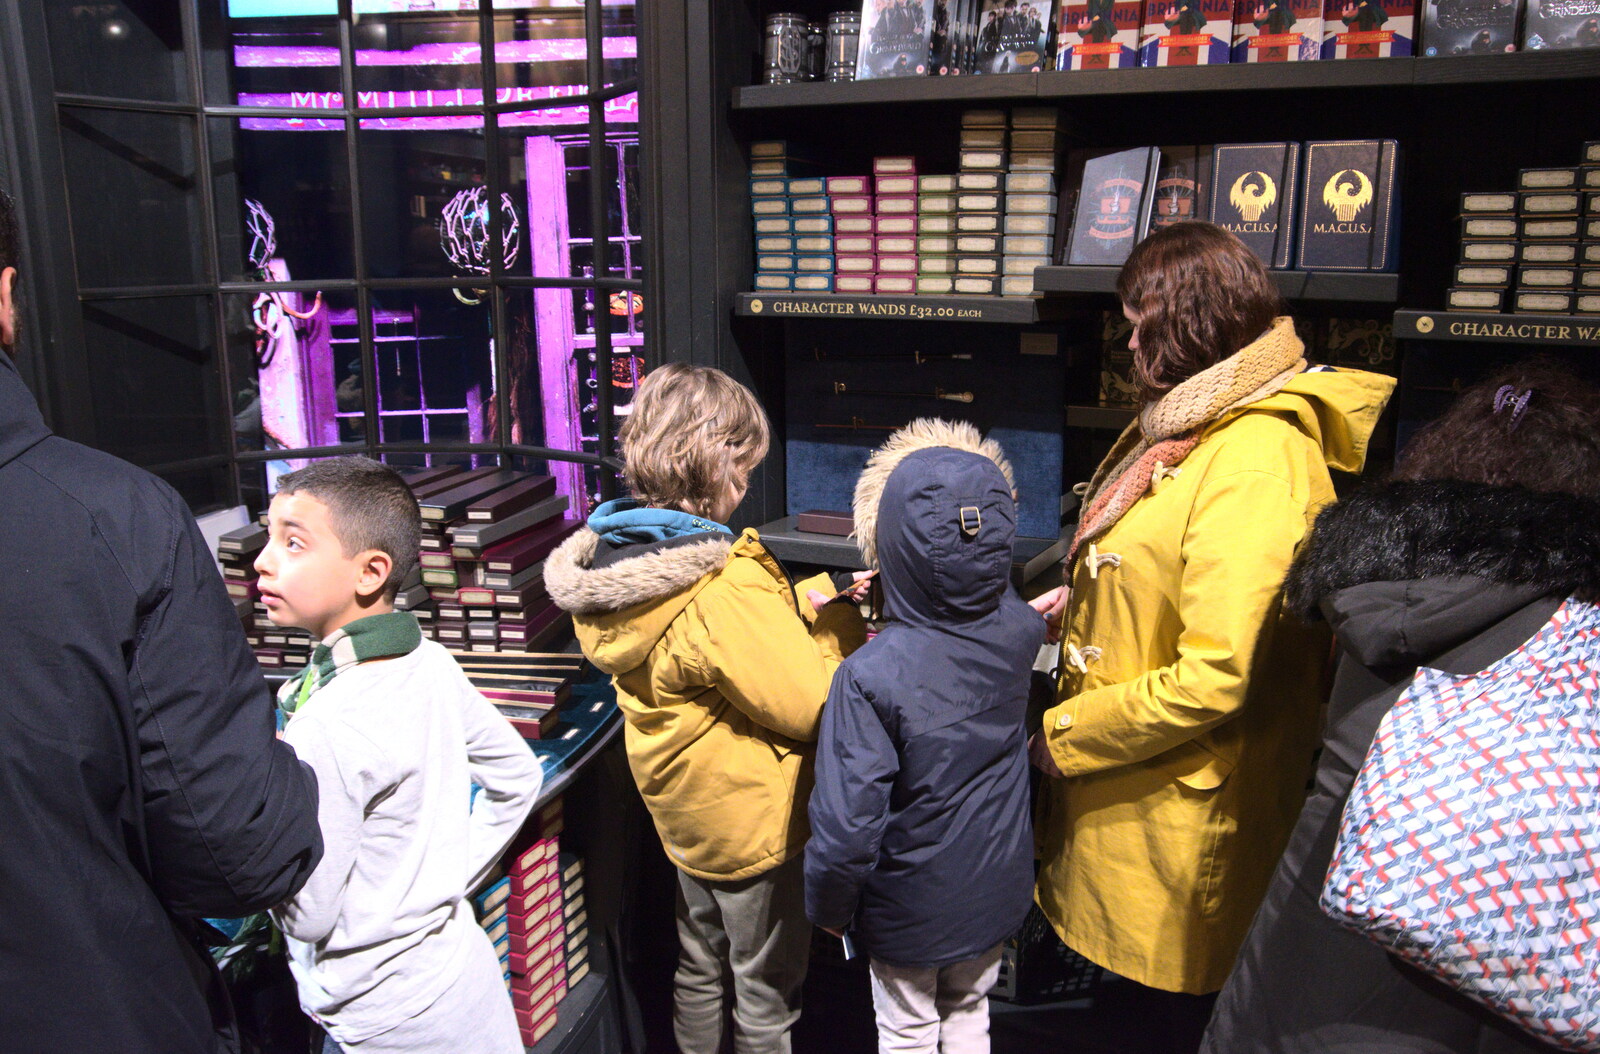 The gang looks at wands from A Trip to Harry Potter World, Leavesden, Hertfordshire - 16th February 2020